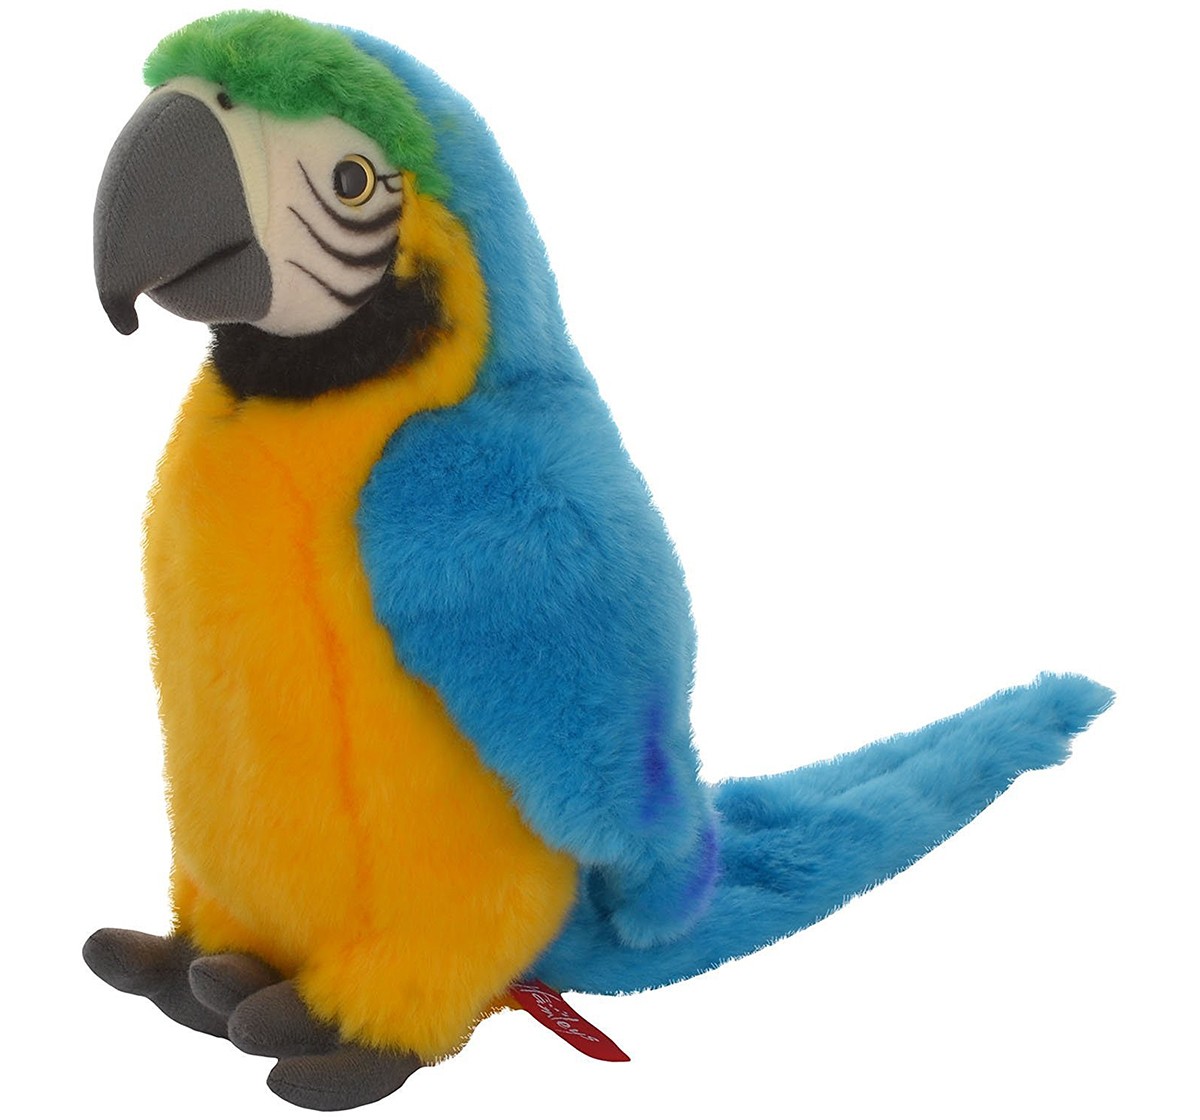  Hamleys Pepper Blue Parrot Soft Toy, Multi Color (5-Inch) Animals & Birds for Kids age 3Y+ - 12 Cm 